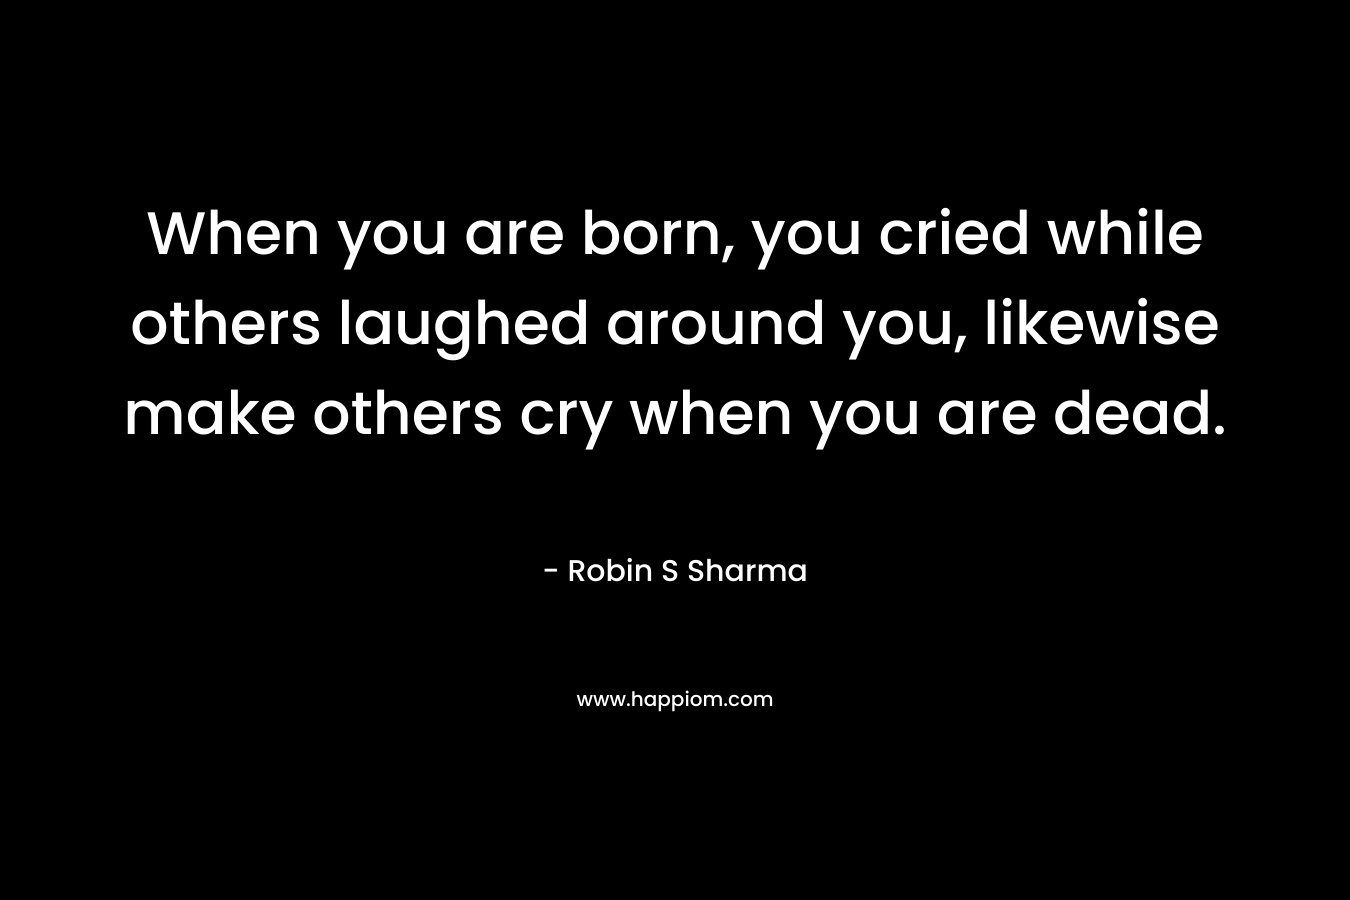 When you are born, you cried while others laughed around you, likewise make others cry when you are dead. – Robin S Sharma